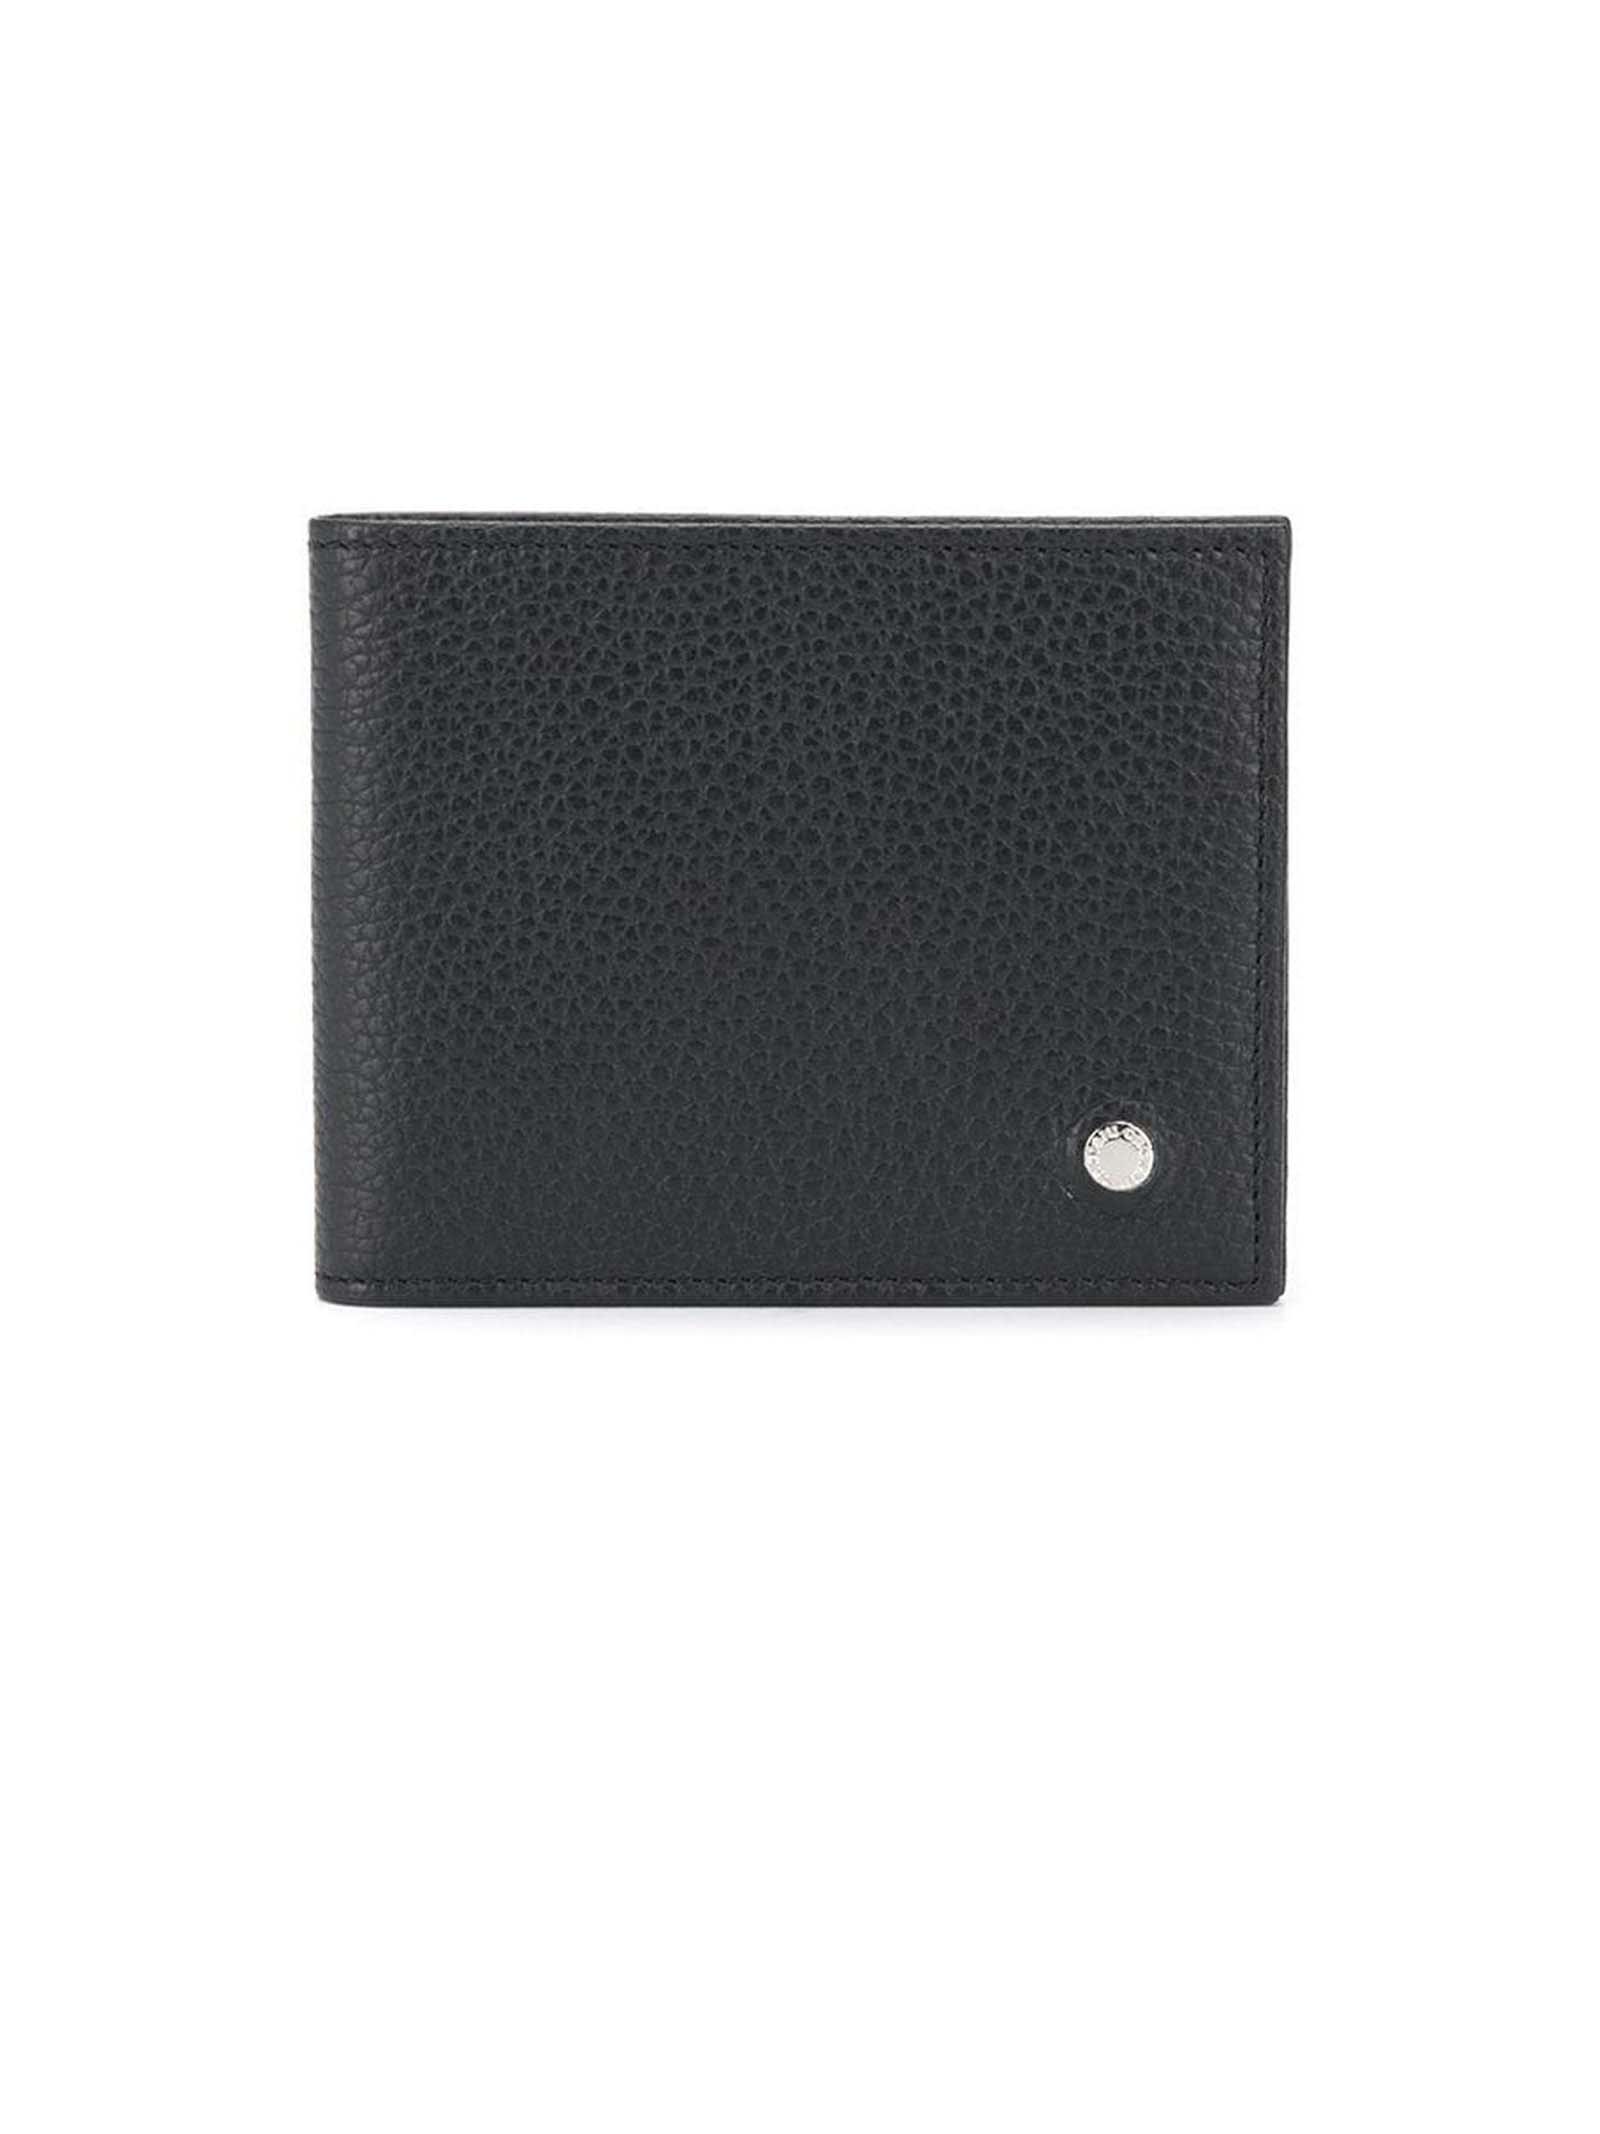 Orciani Black Leather Bifold Wallet